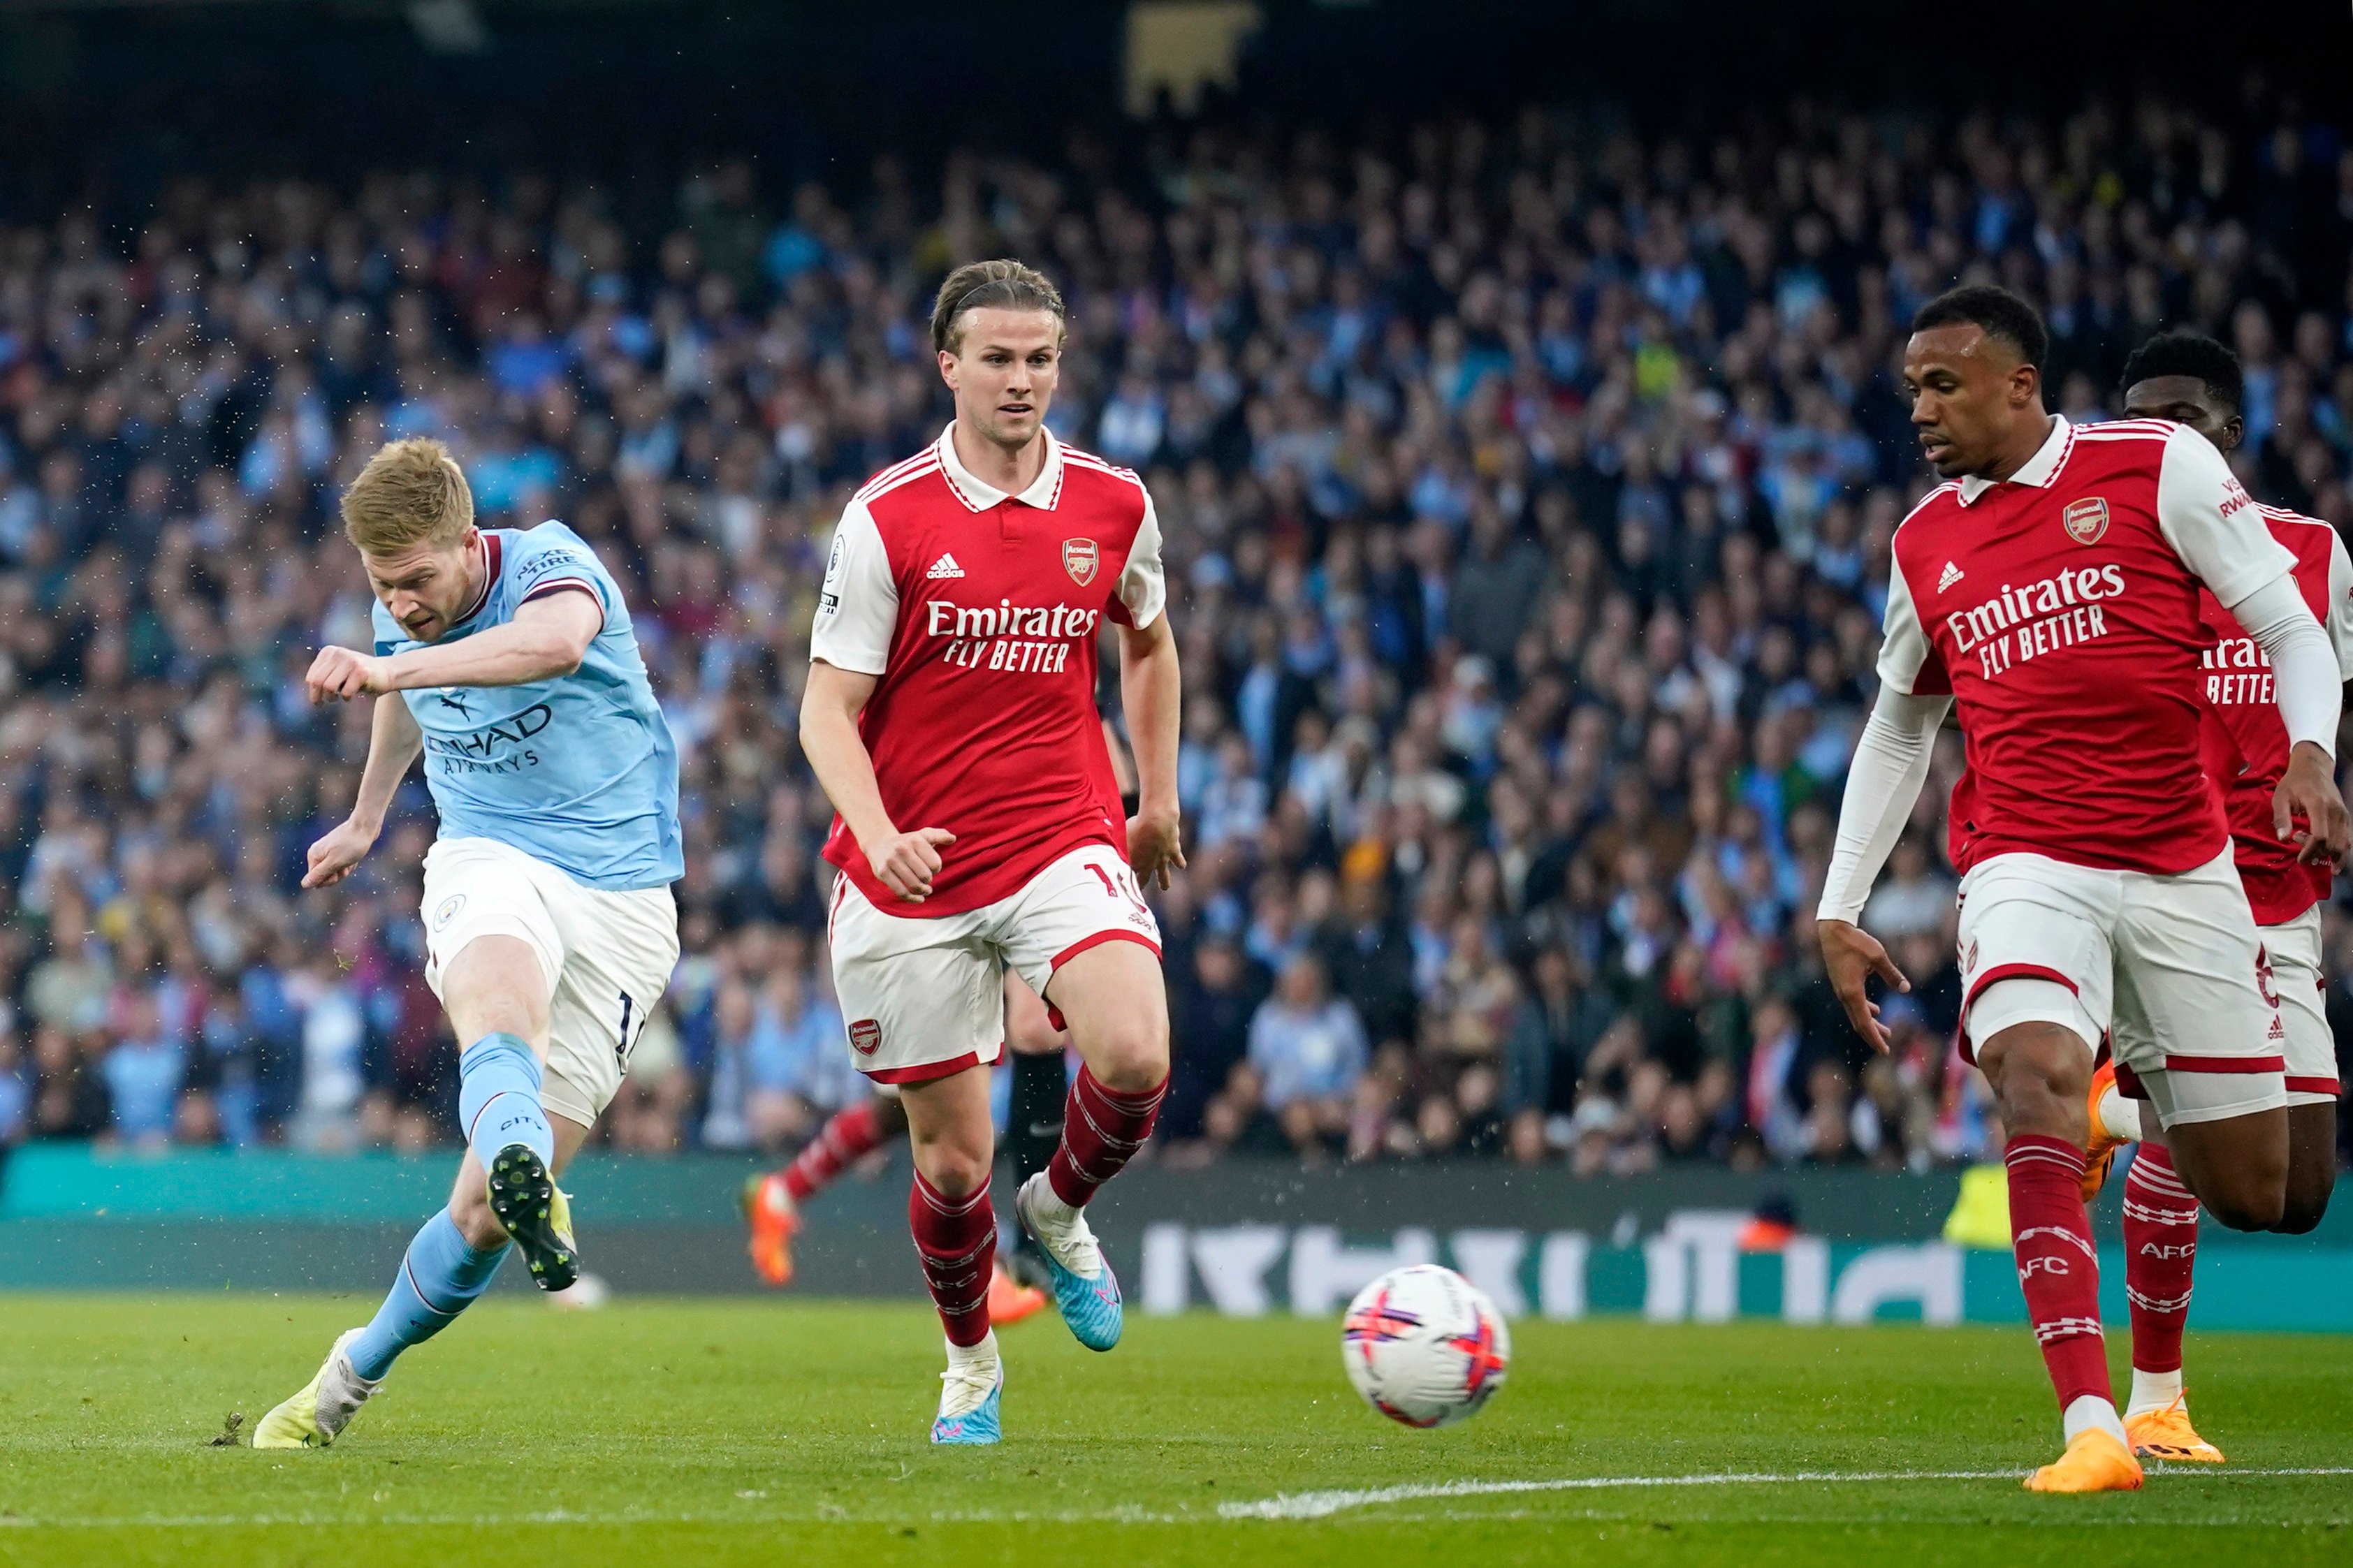 Manchester City’s Kevin De Bruyne scores against Arsenal in last season’s title run-in, edged by City. Photo: AP